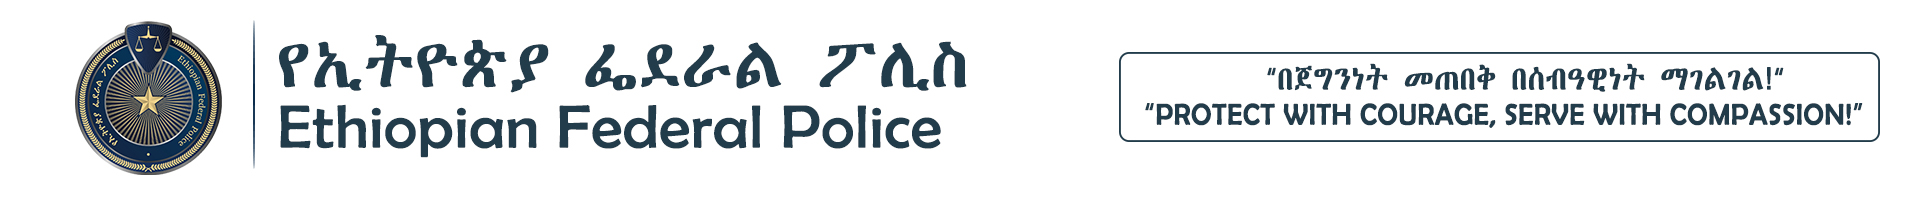 Ethiopian Federal Police Commission